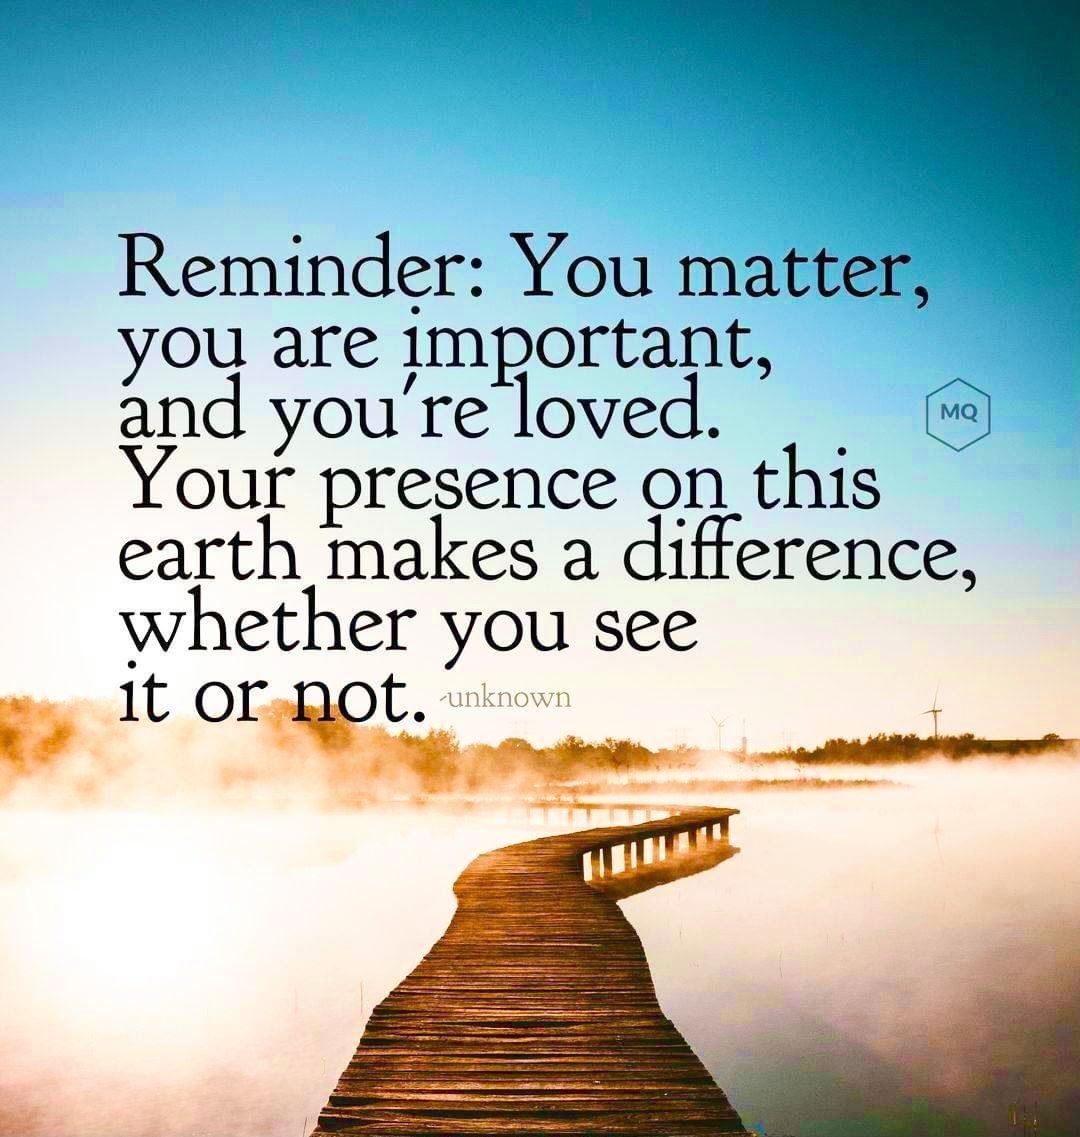 Reminder: You matter, you are important, and you're loved. Your presence on this earth makes a difference, whether you see it or not.